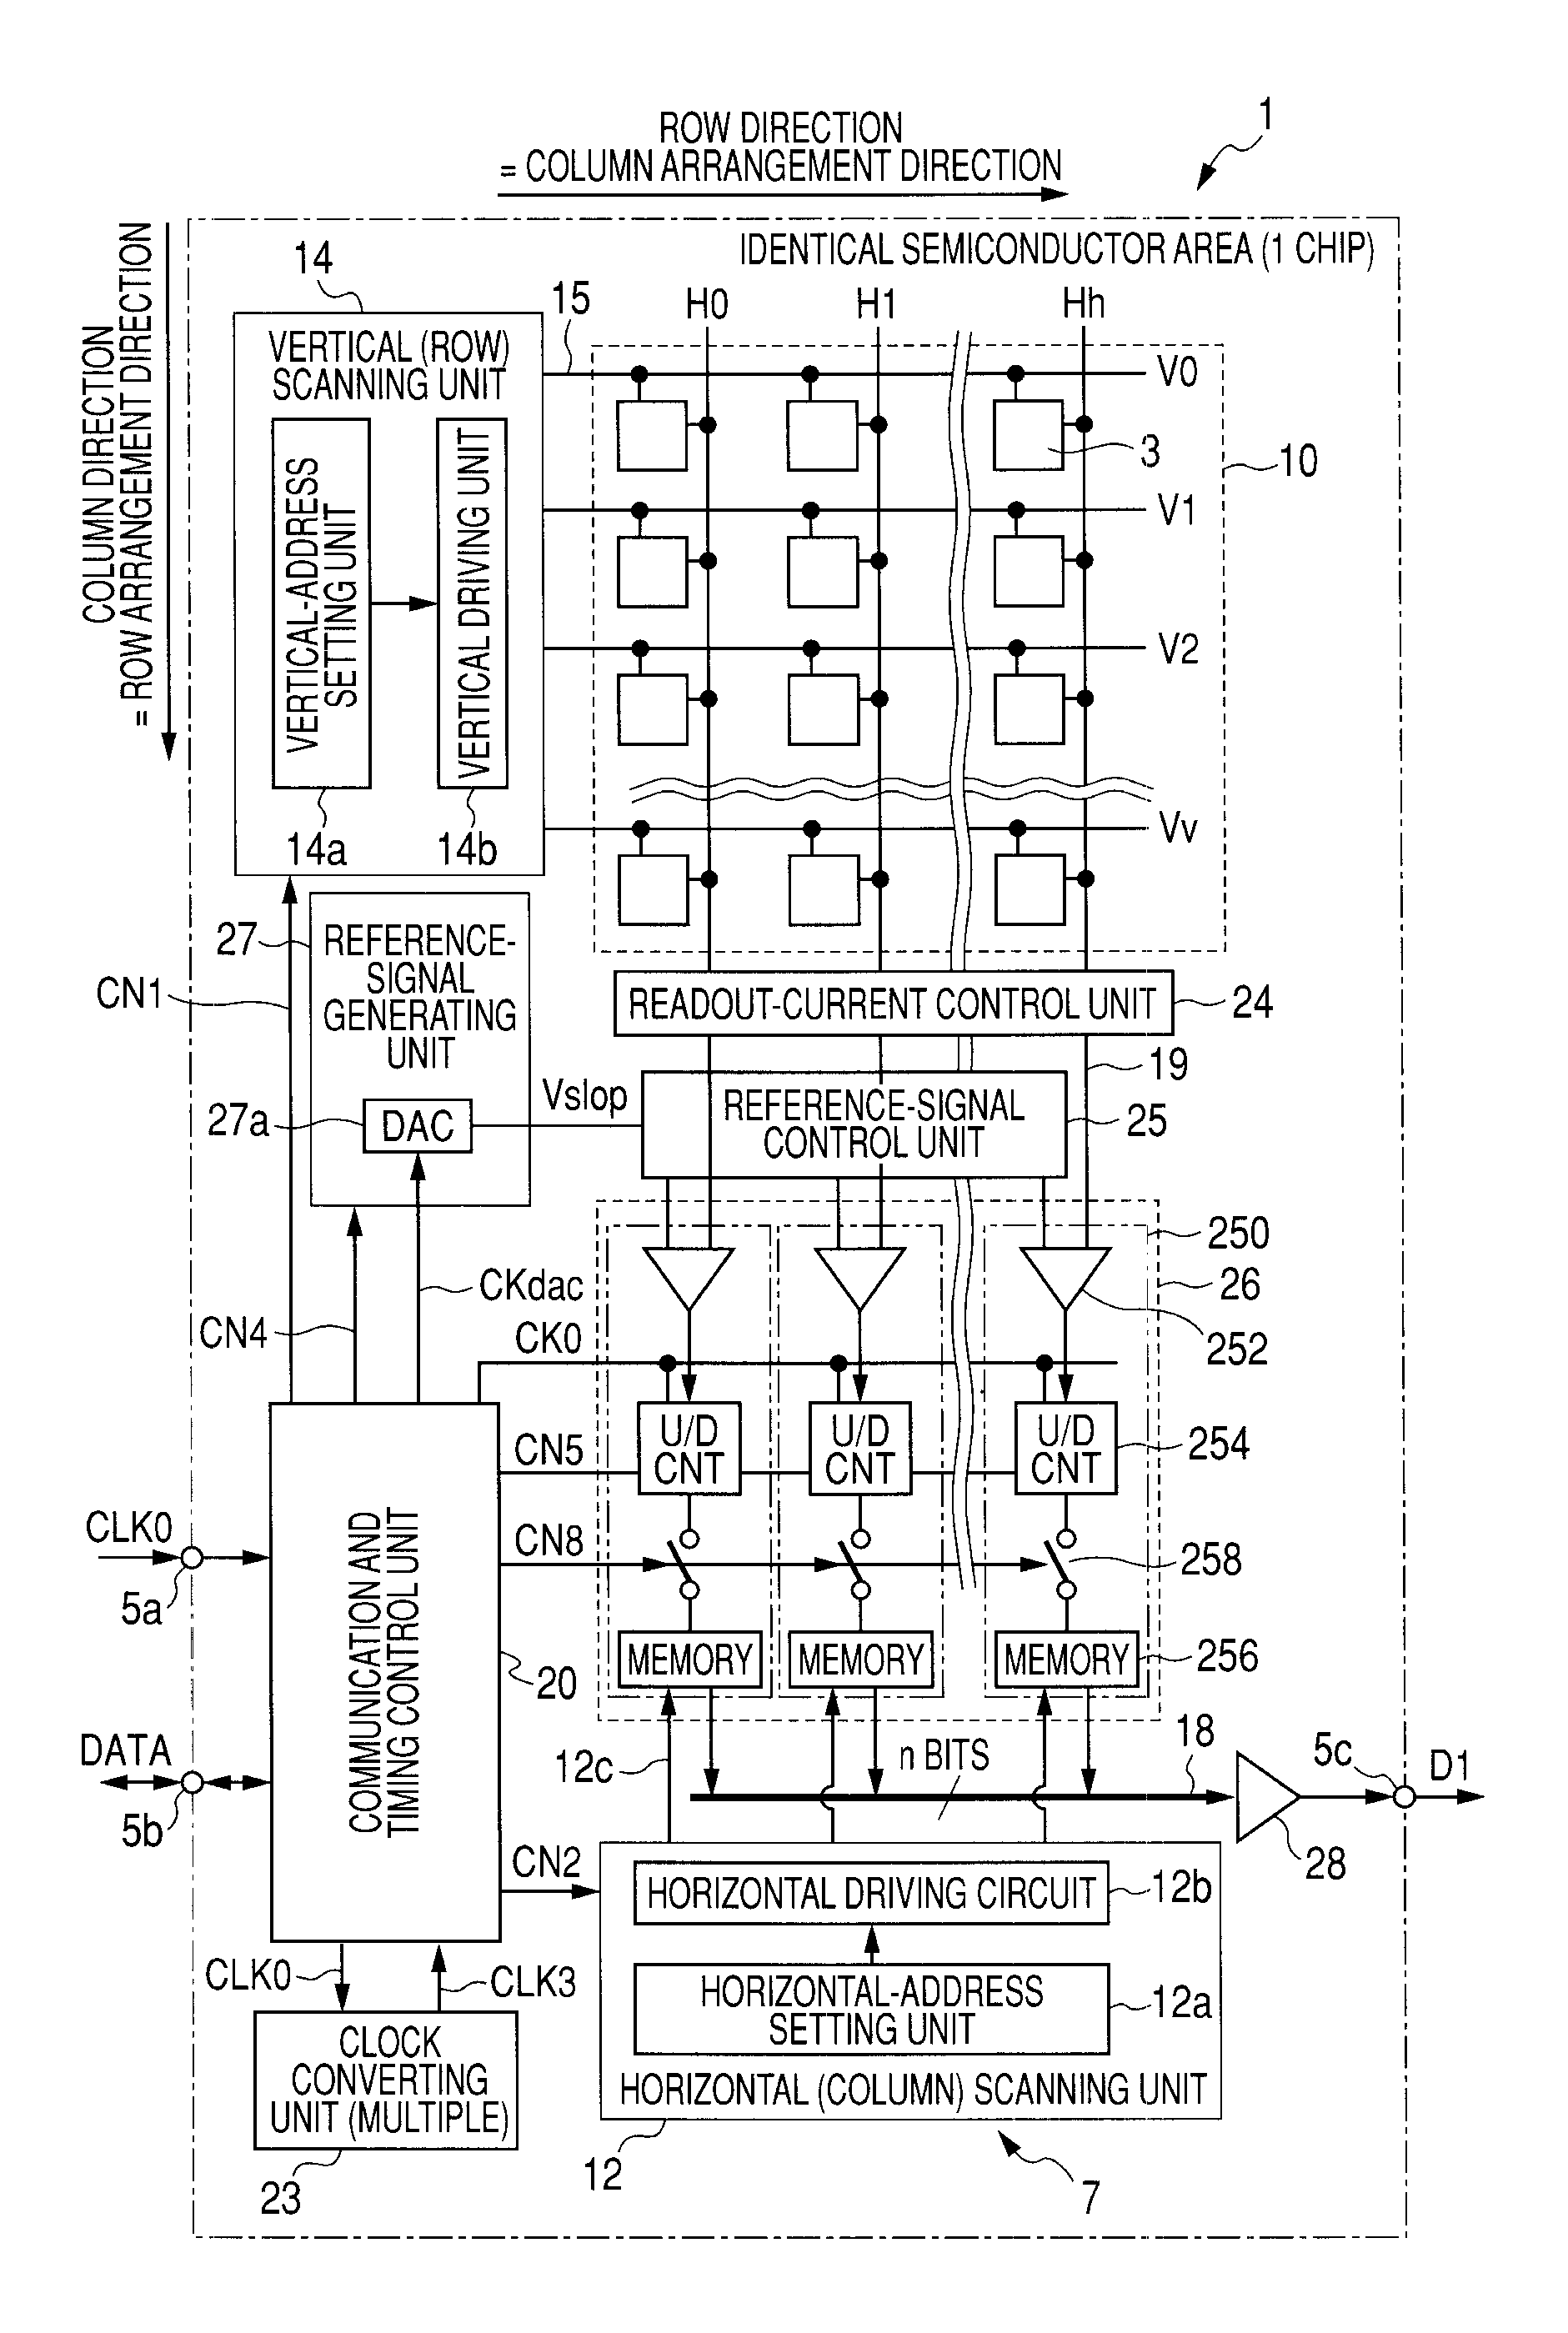 Solid-state imaging device and apparatus with an increased speed of analog to digital conversion